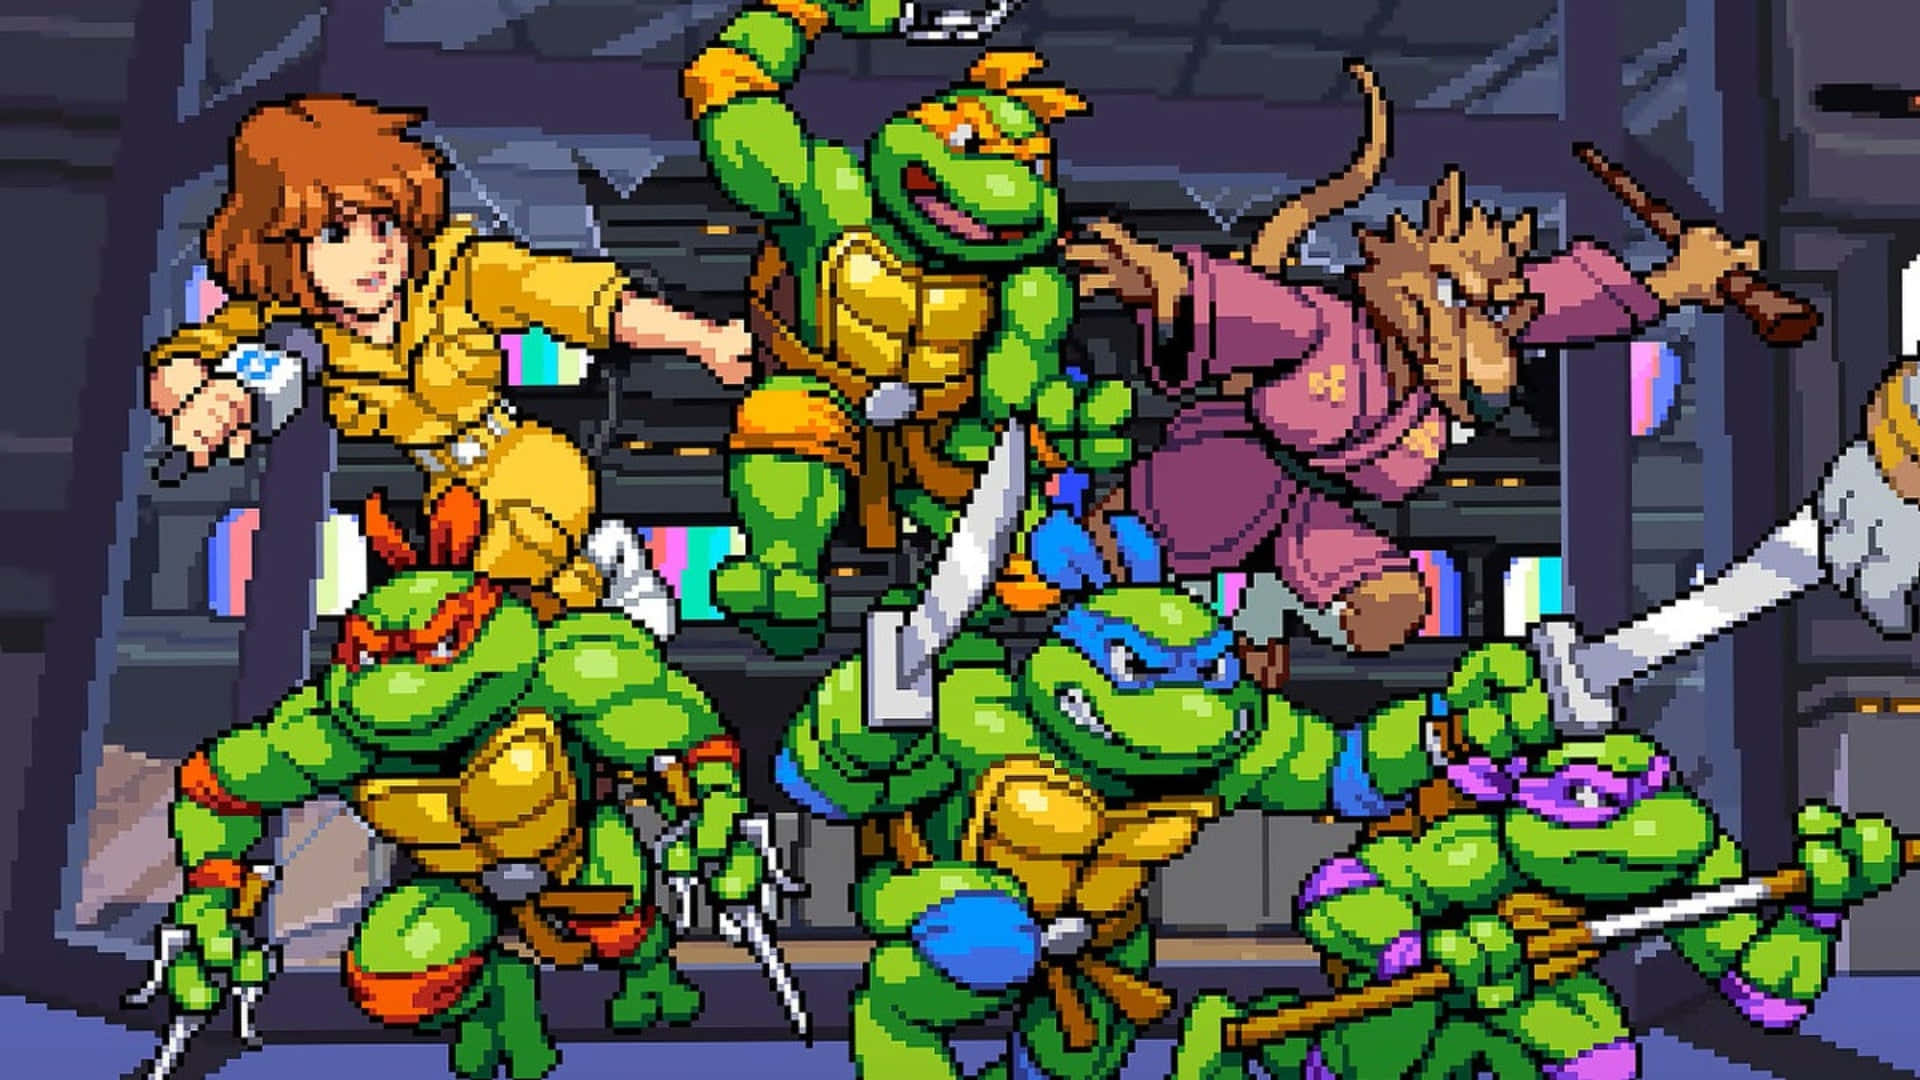 Get Ready To Party With The Turtles! Background